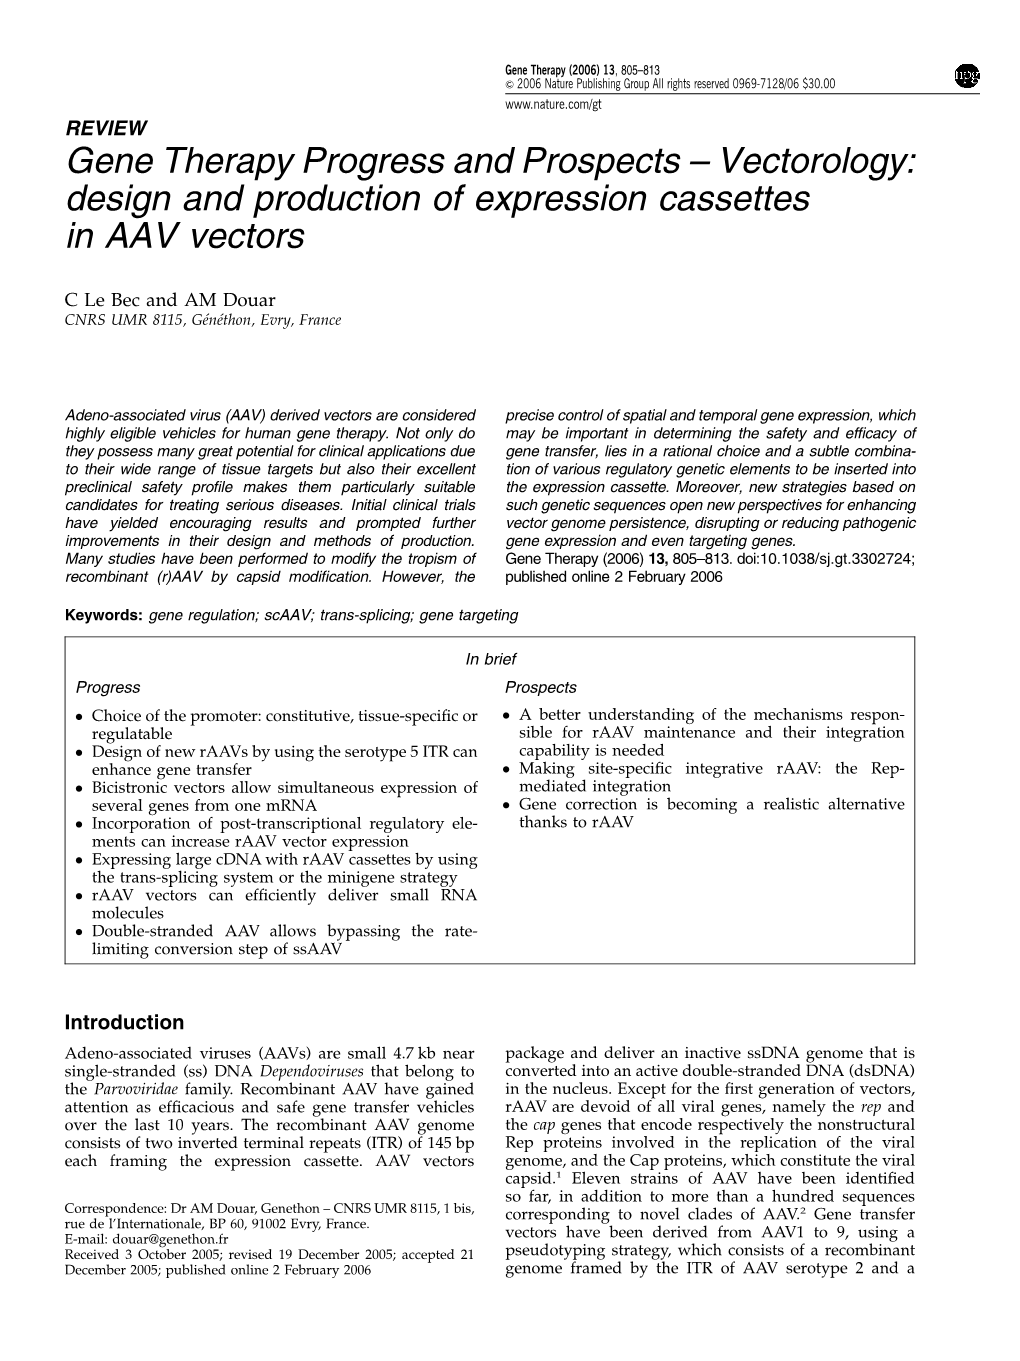 Design and Production of Expression Cassettes in AAV Vectors